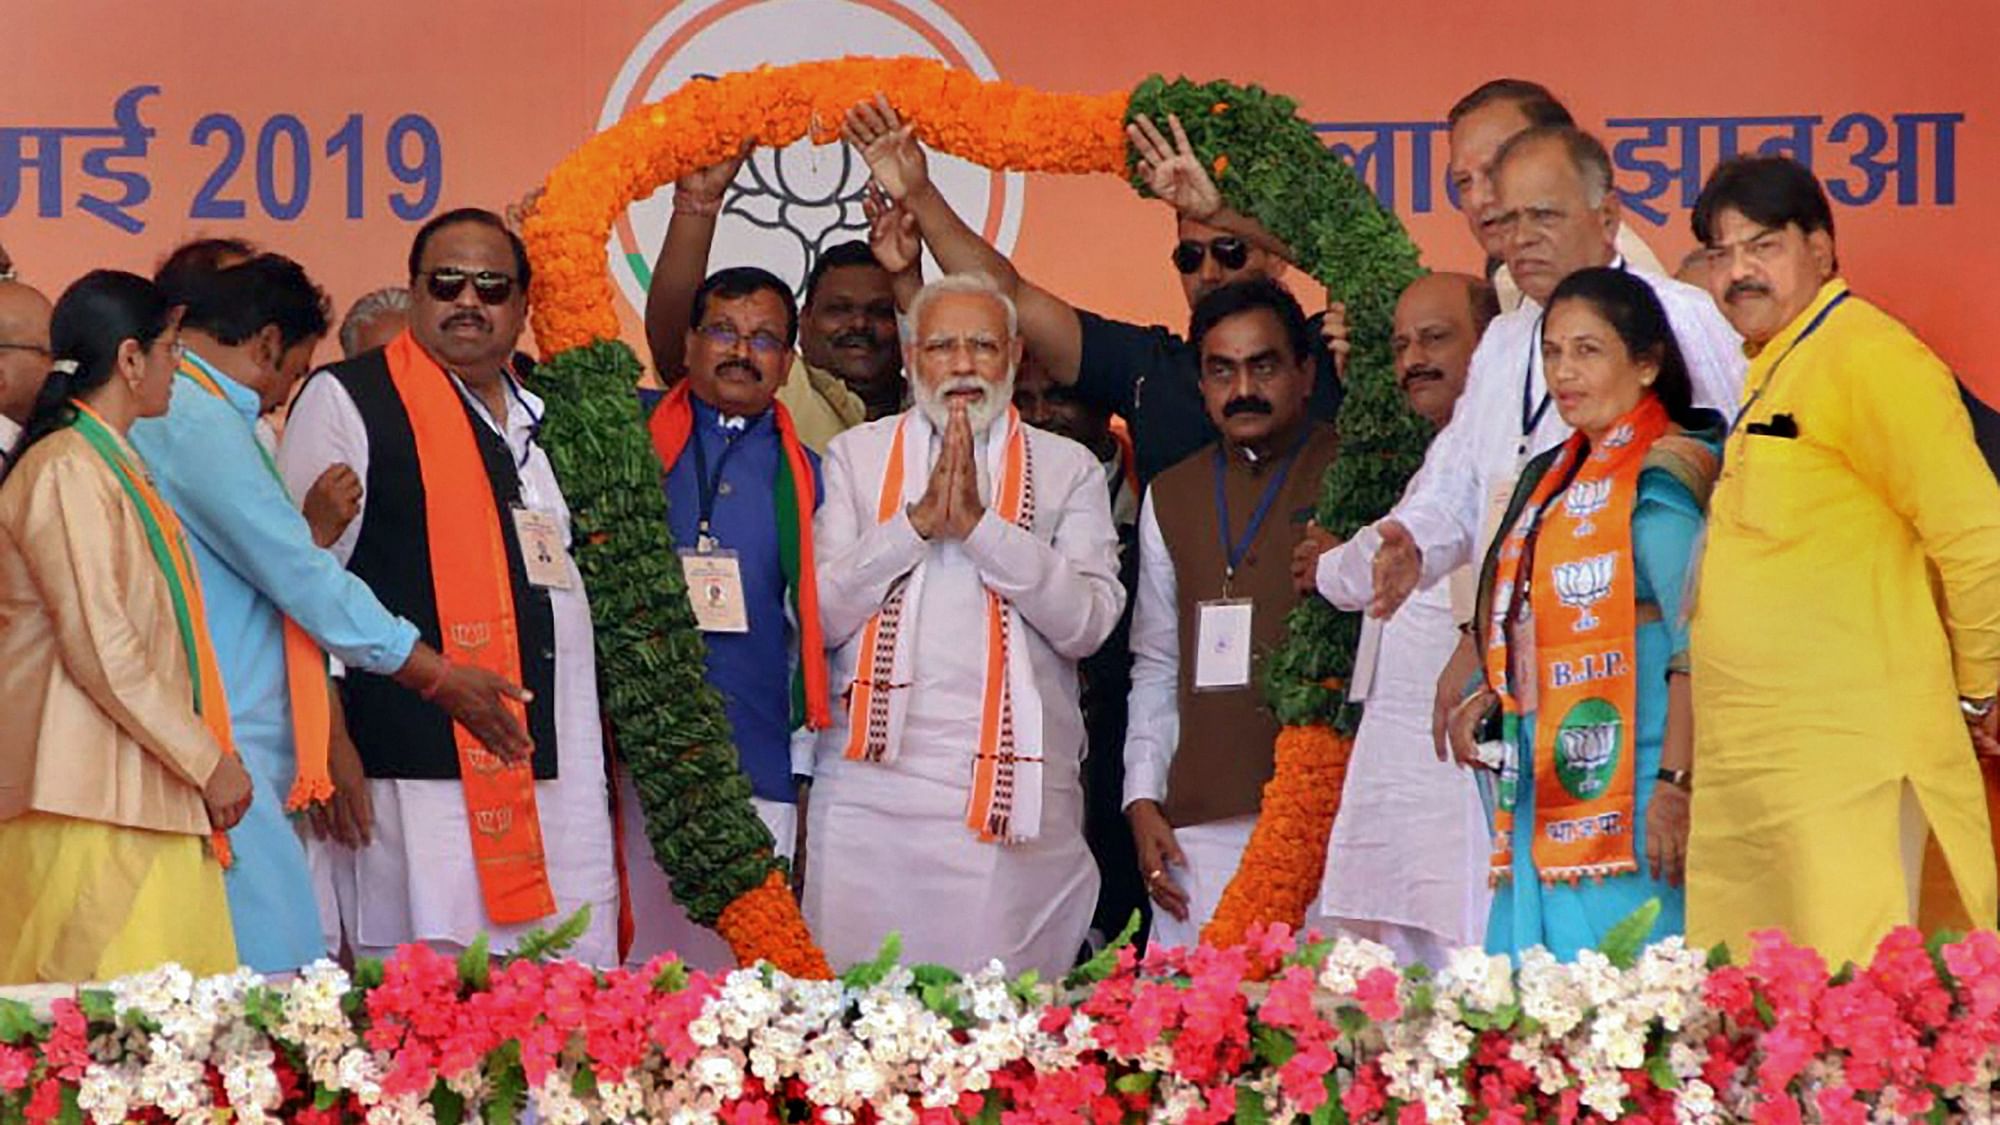 PM Modi being garlanded during an election campaign rally in Ratlam on 13 May 2019.